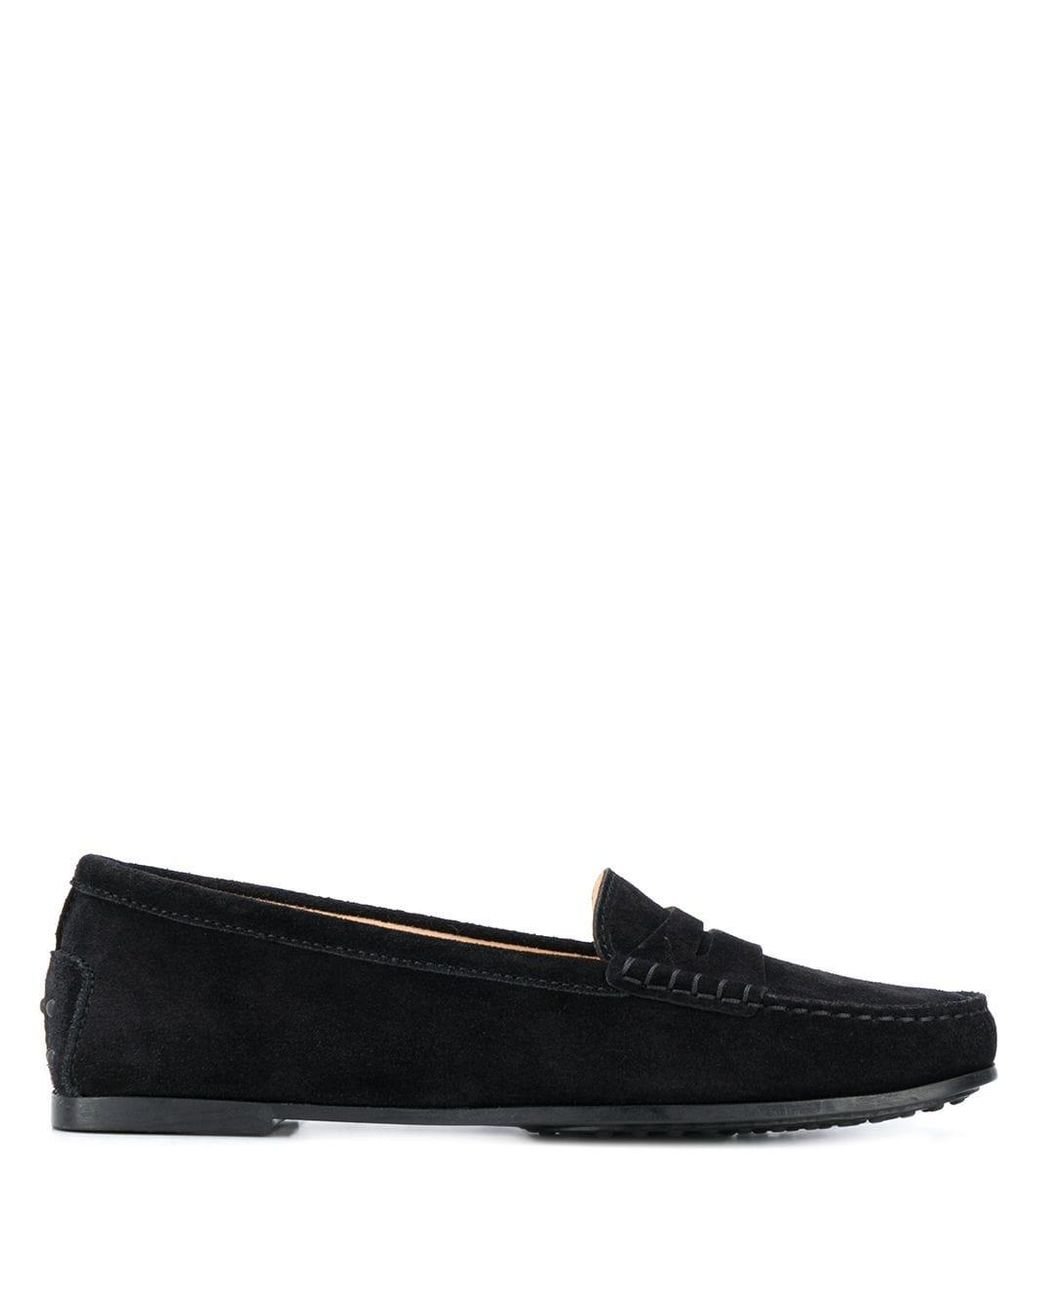 Tod's Suede City Gommino Driving Shoes in Black - Lyst